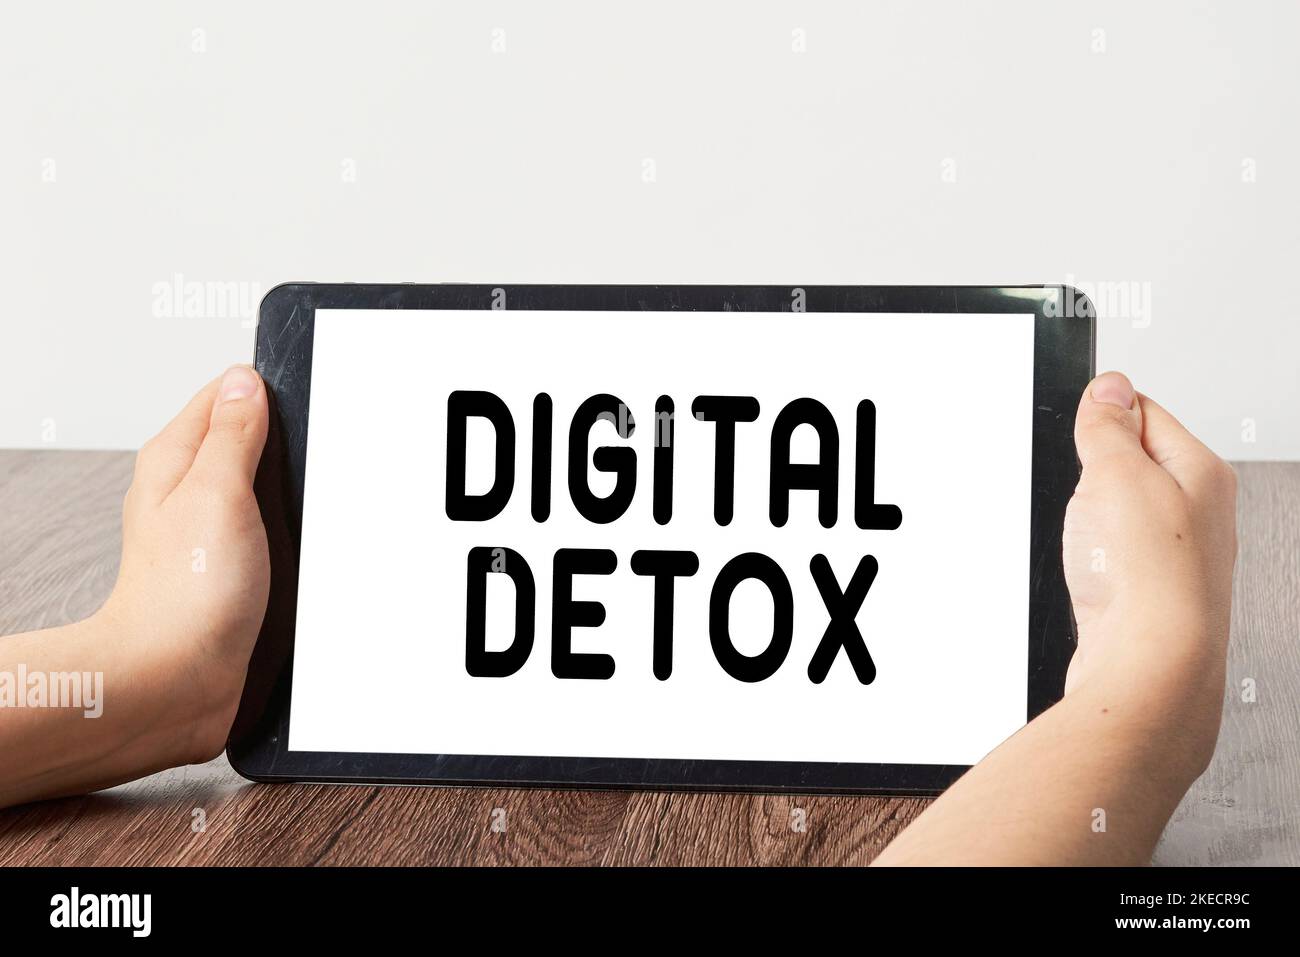 two hands holding a tablet with the word digital detx on it and an image of someone's hand Stock Photo